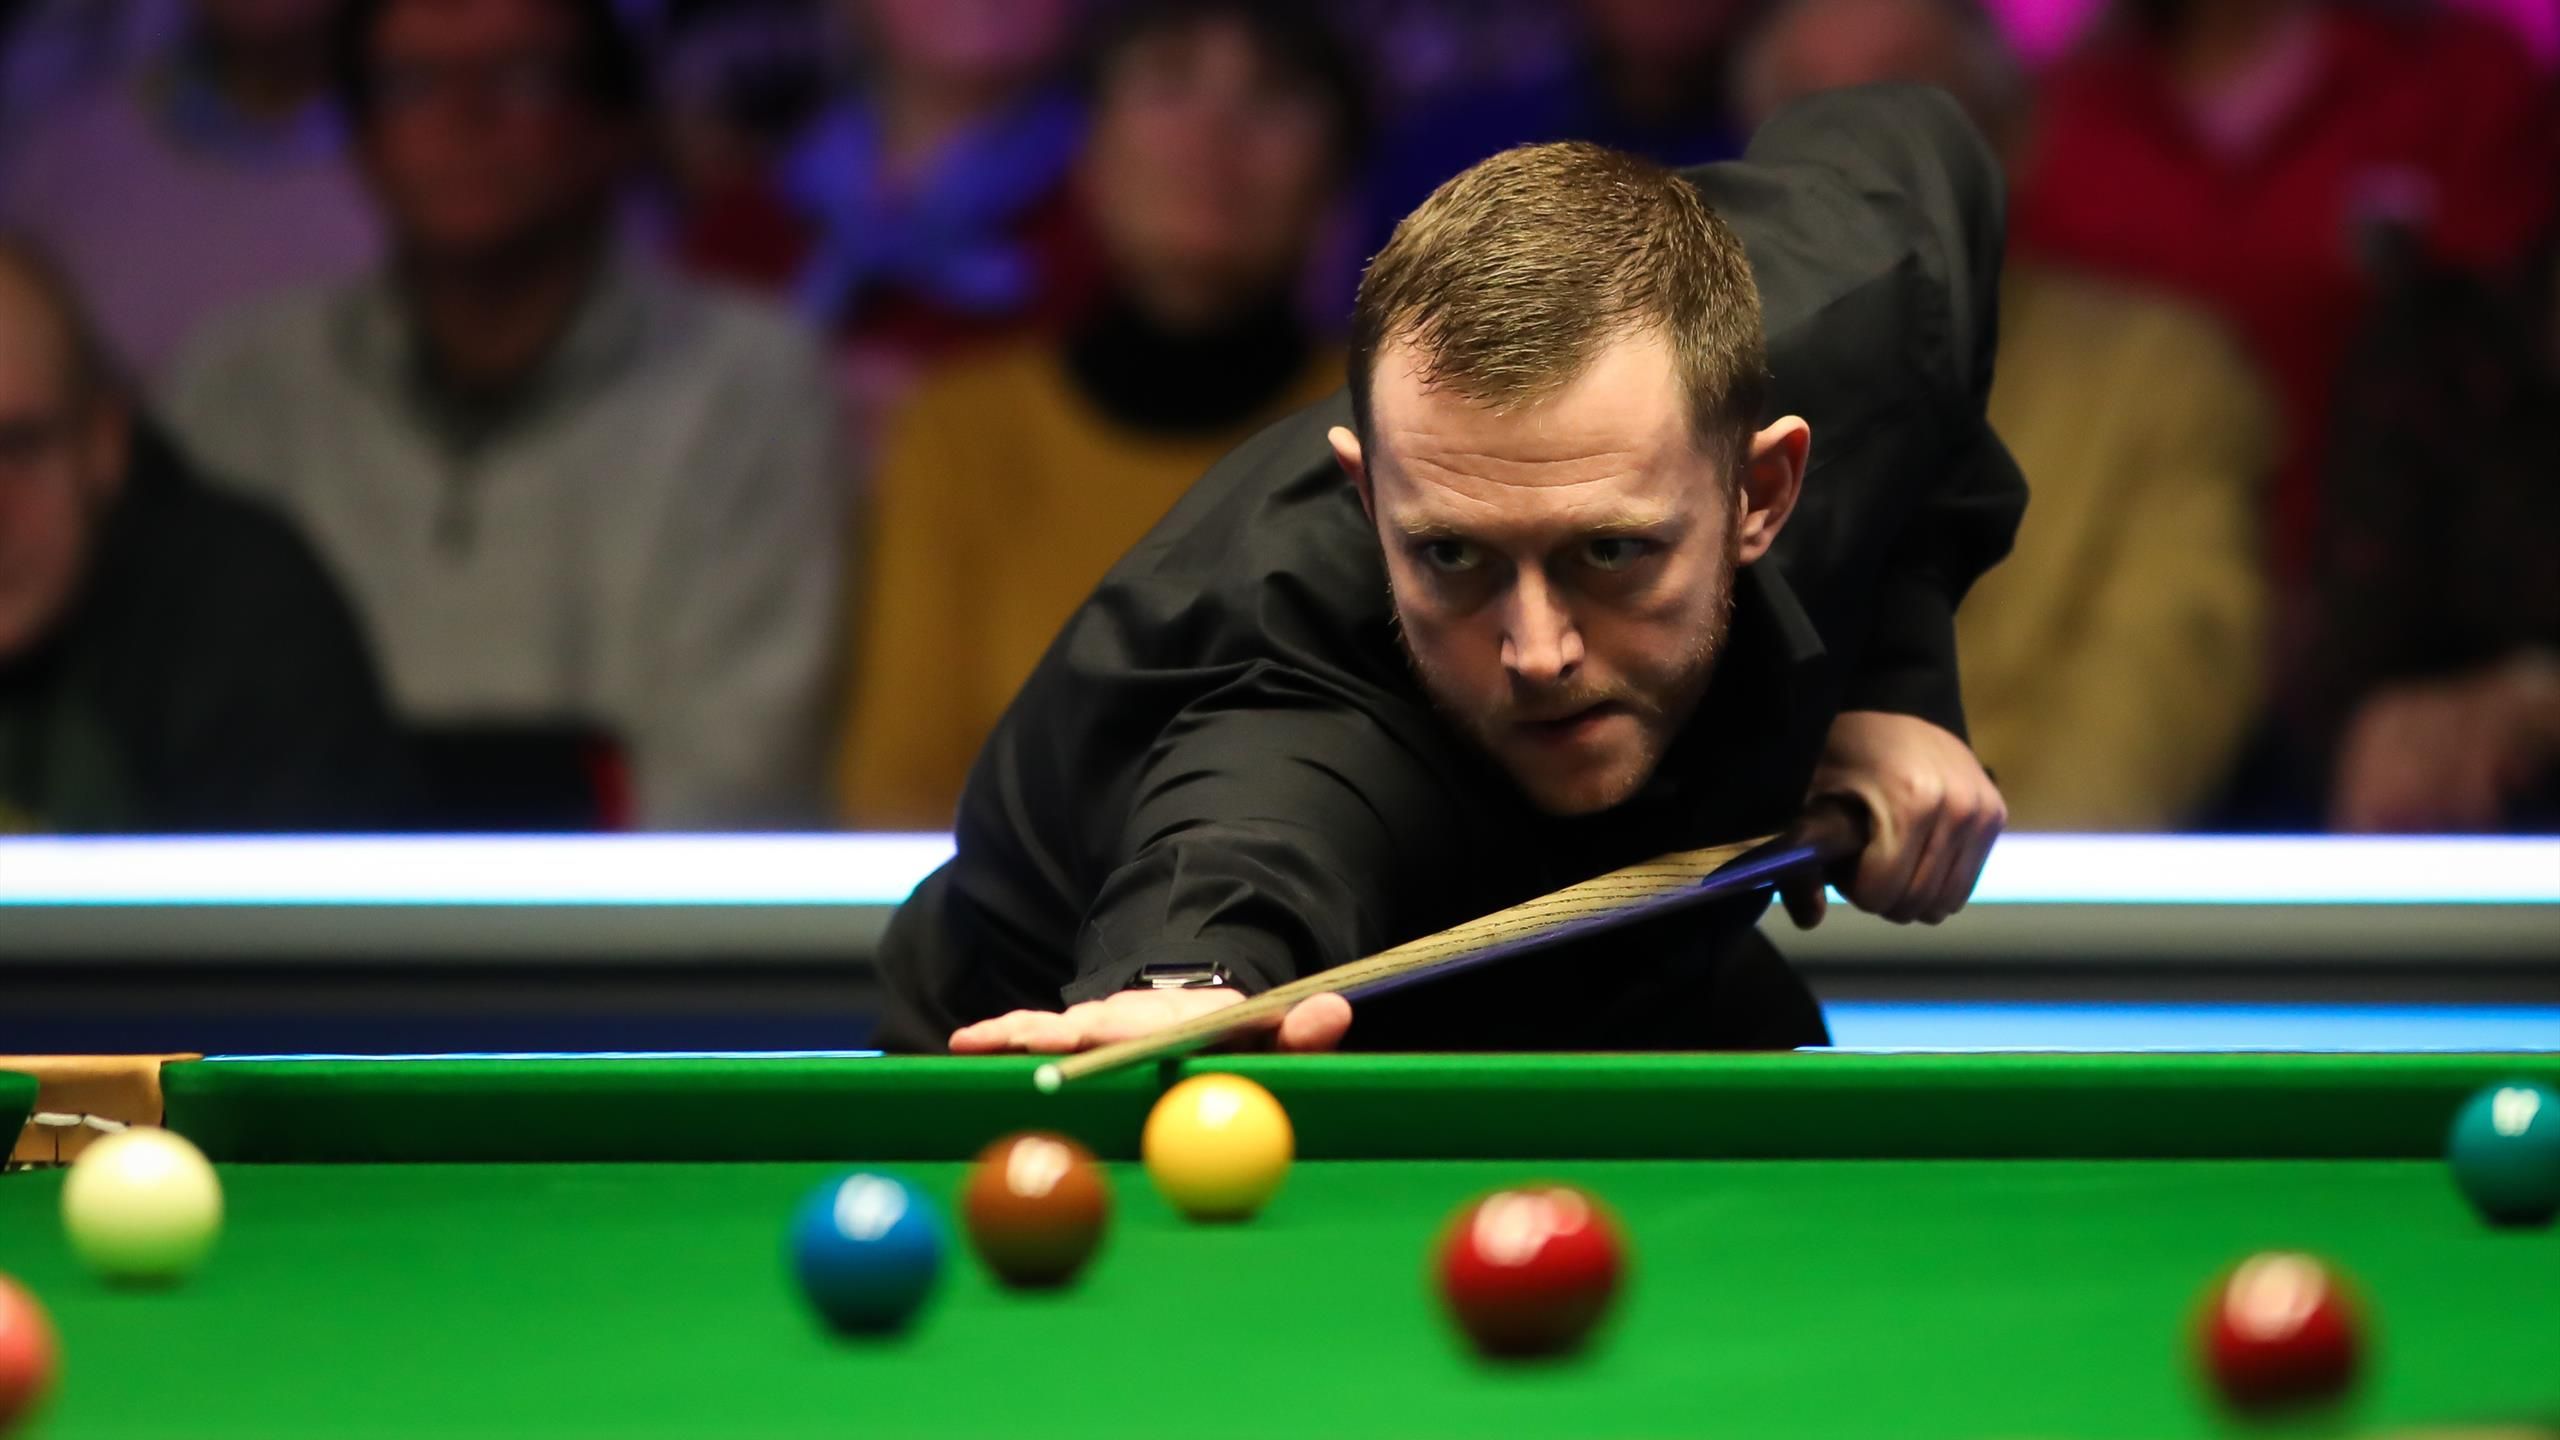 Players Championship 2023 LIVE - Mark Allen faces off against Joe OConnor, Ryan Day goes up against Chris Wakelin